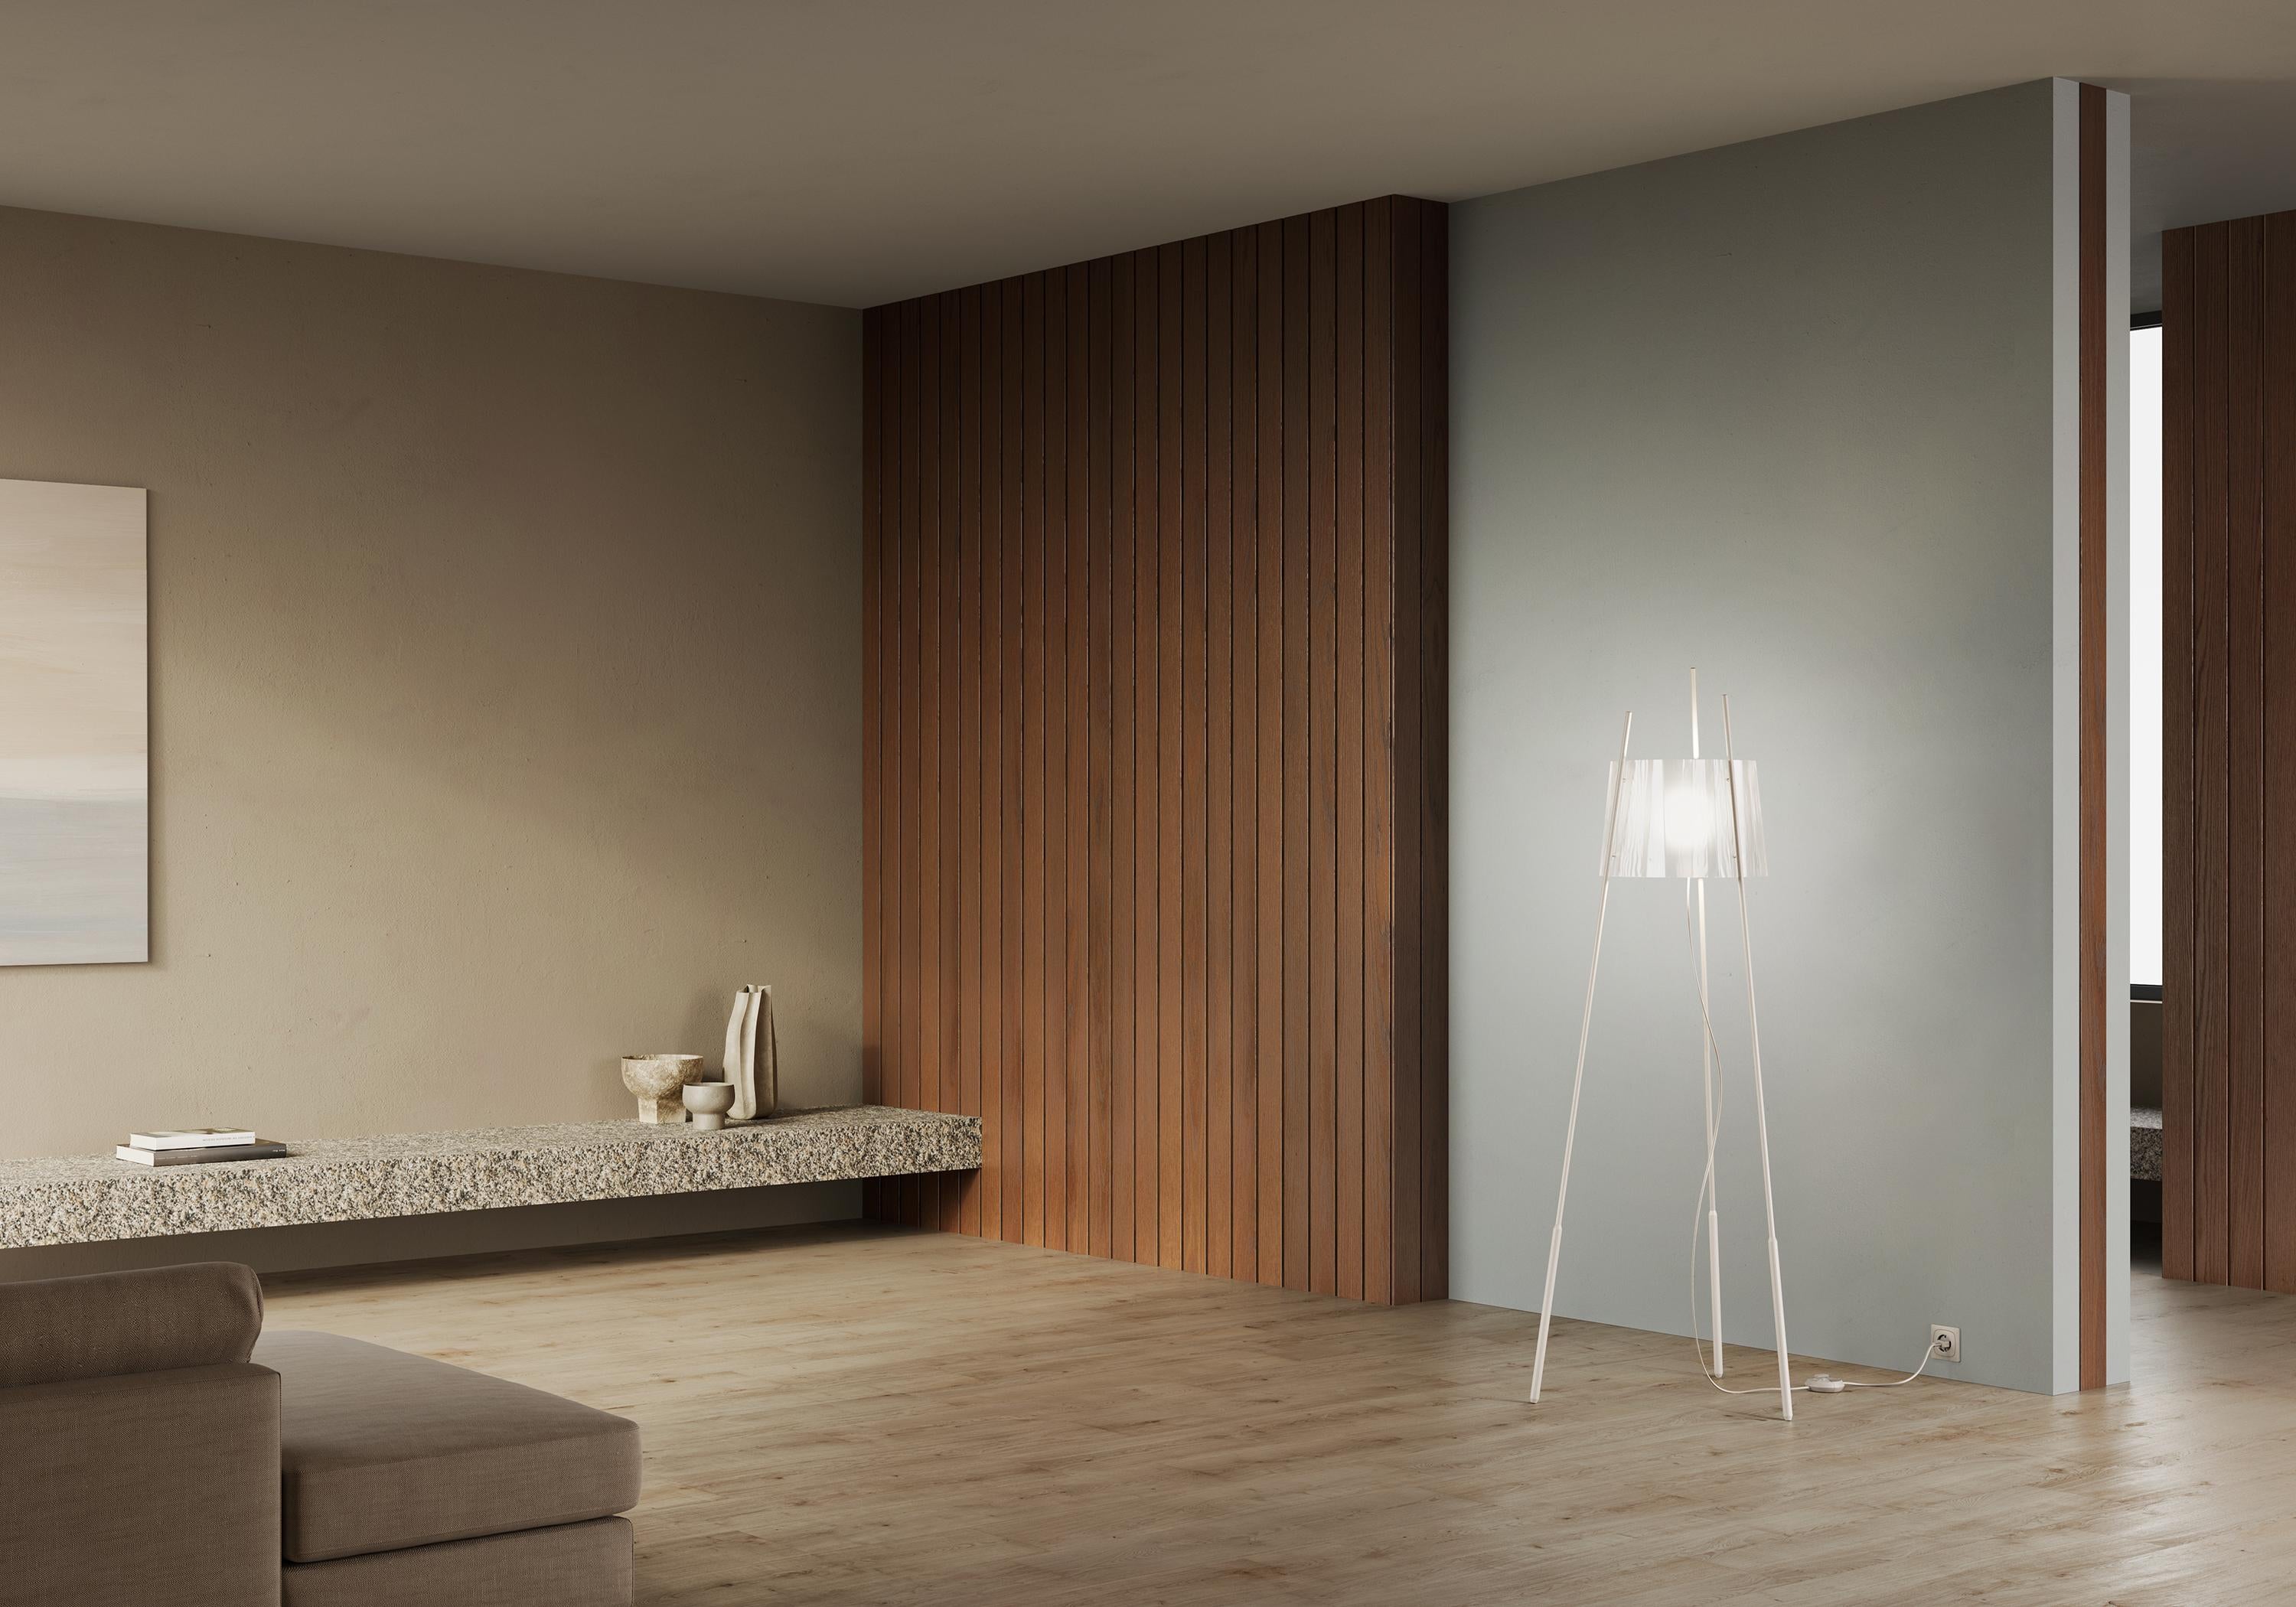 TYLA white finish

The long slender stems of the bulrush, an elegant aquatic plant, are the inspiration behind the elements which support this light with a delicate, almost lyrical design. And the same movement of the plant in the wind is